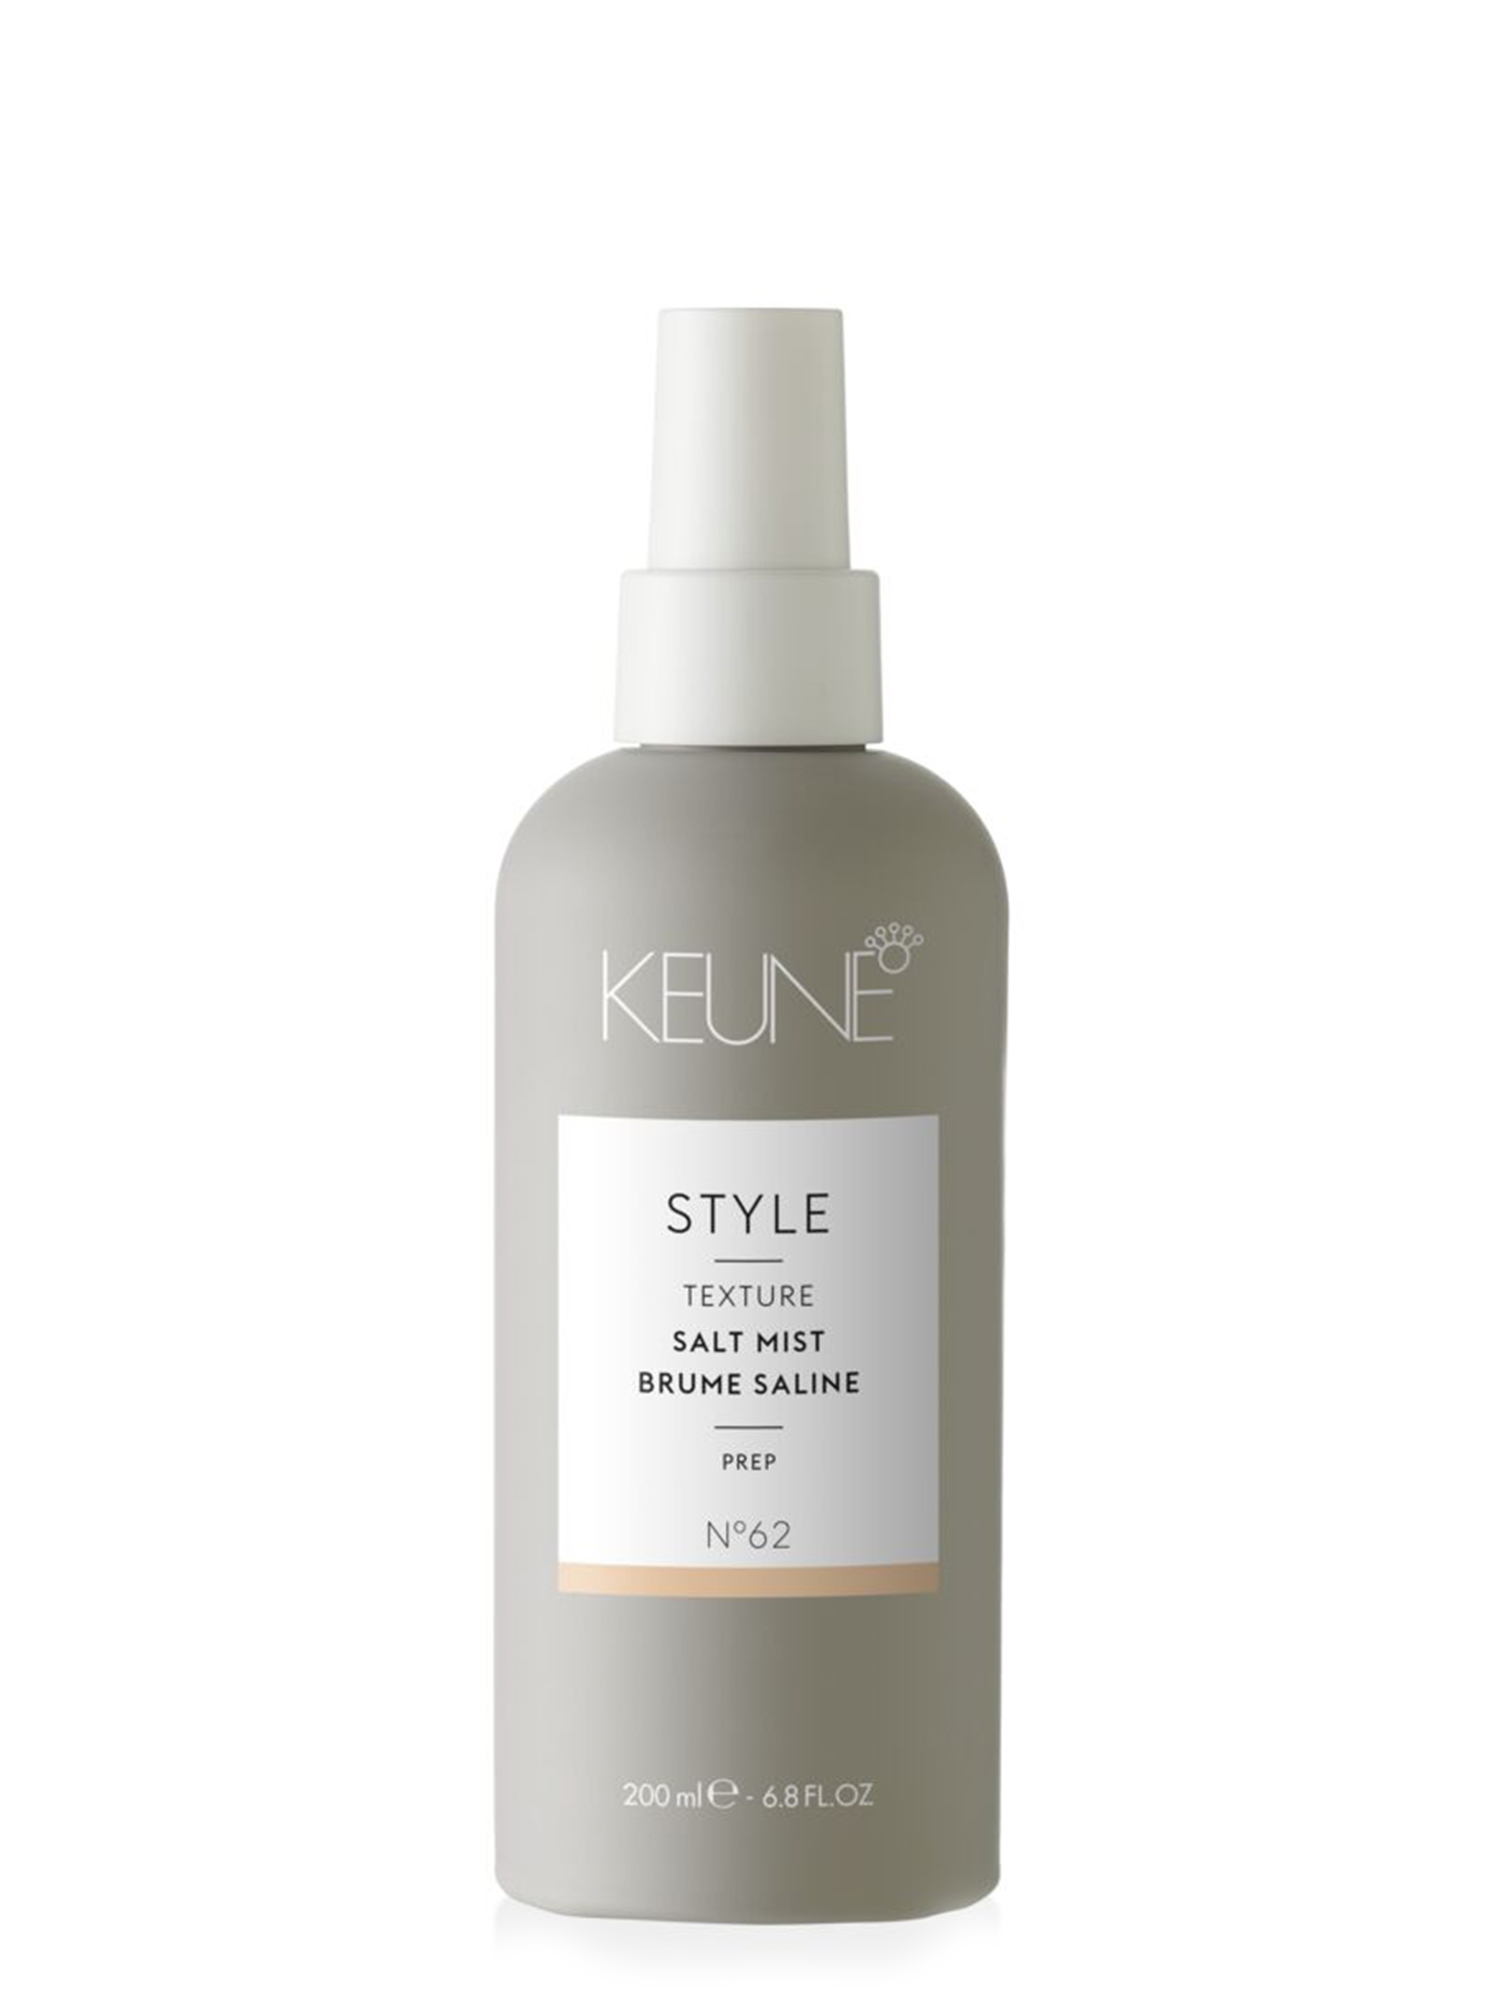 STYLE SALT MIST: Sea salt spray for more texture, beach waves, matte finish, and volume in thin hair. Creates the coveted beach look. Available on keune.ch.